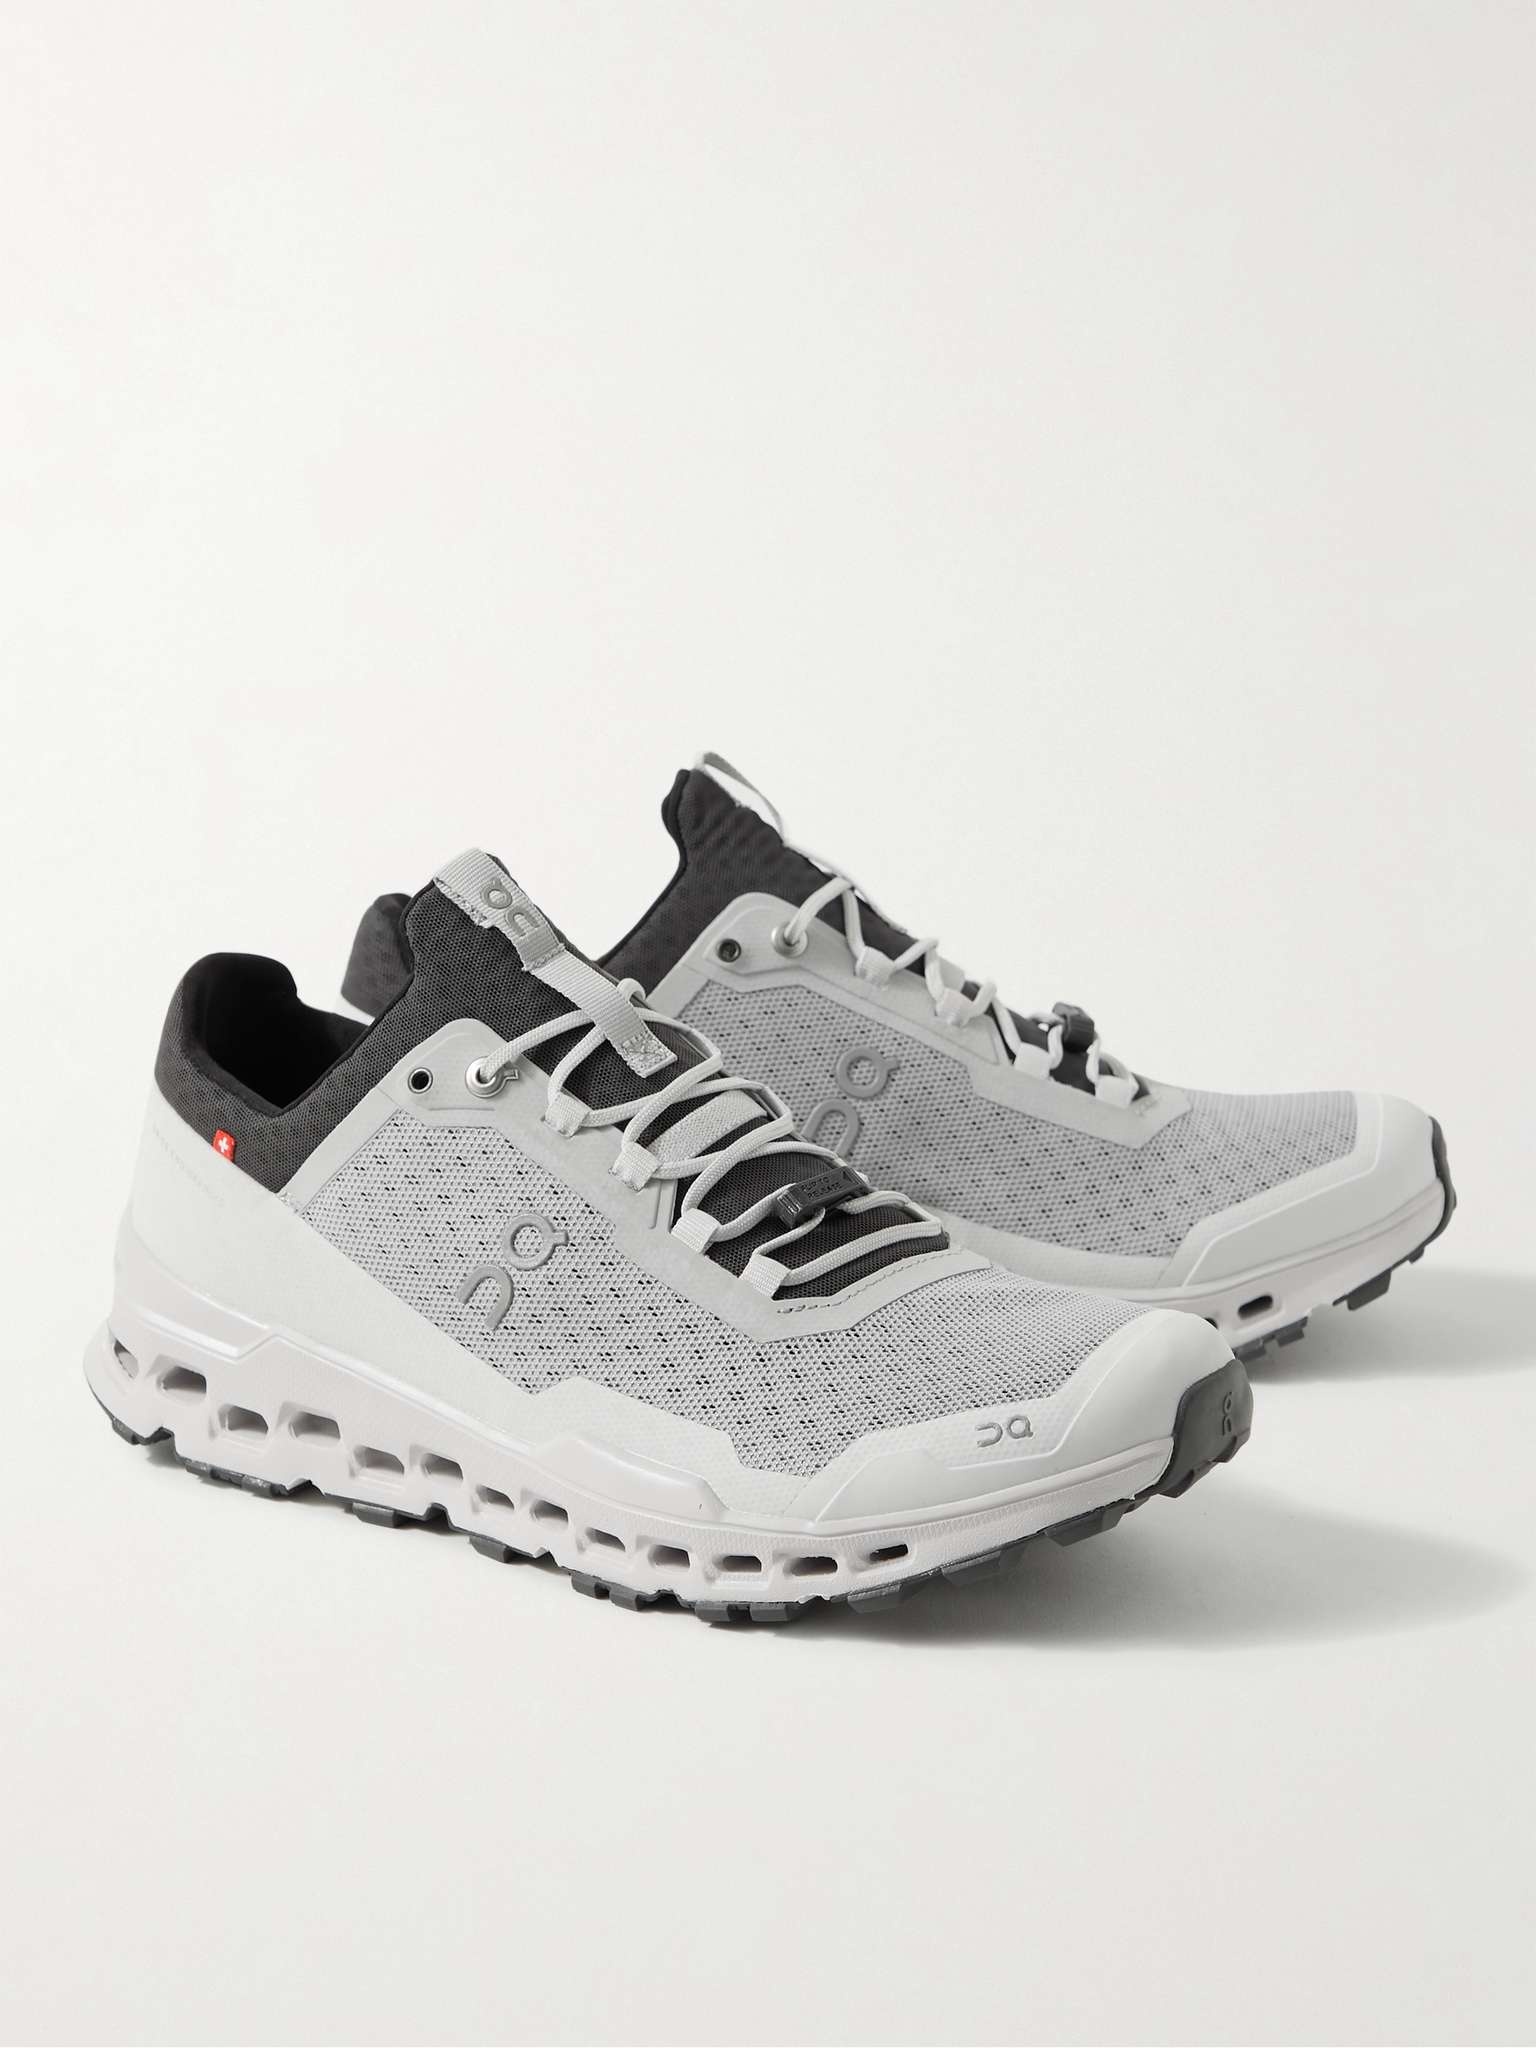 Cloudflow 4 Rubber-Trimmed Mesh Running Sneakers